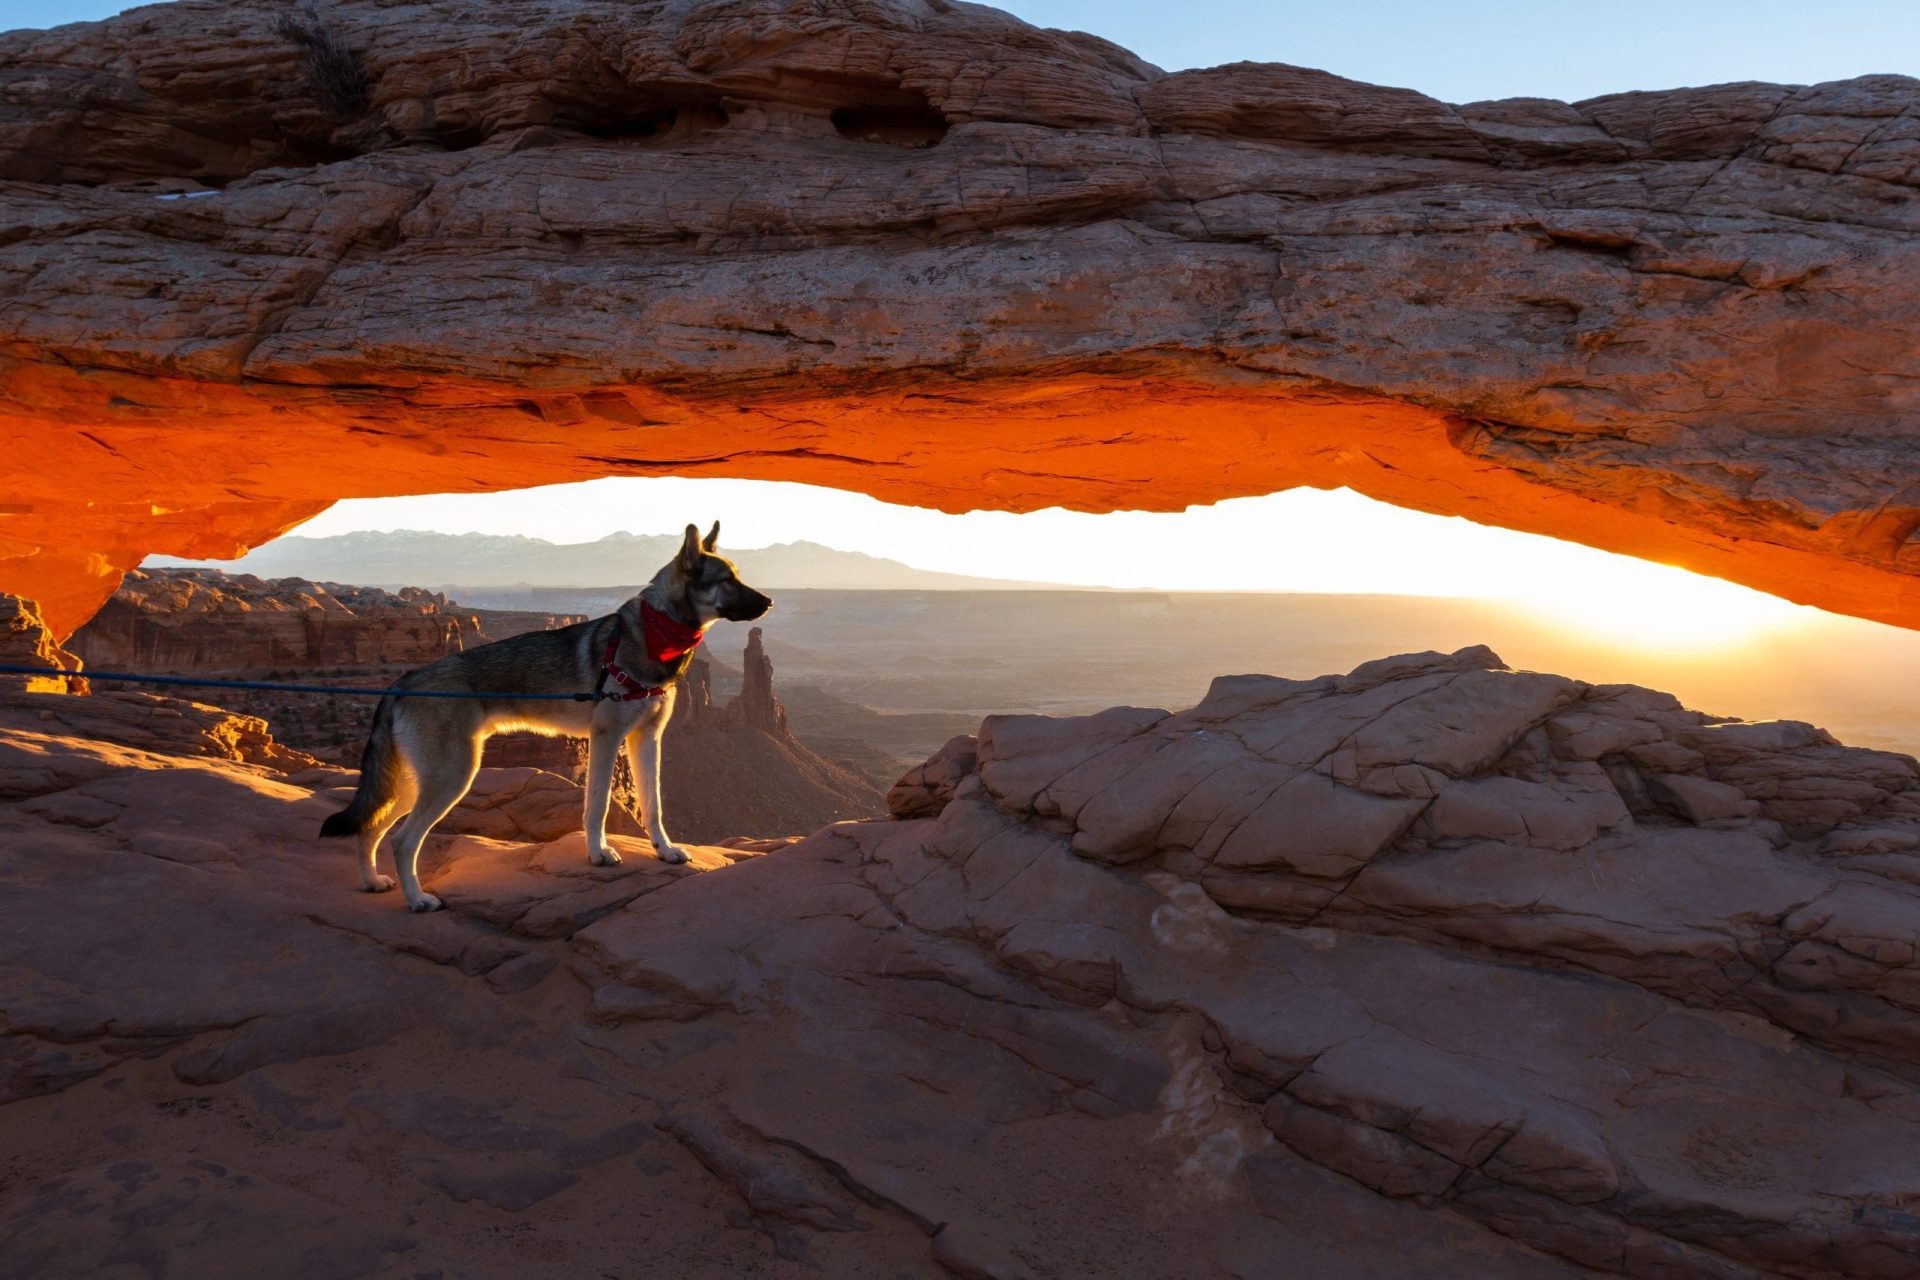 Are Dogs Allowed in Arches National Park?